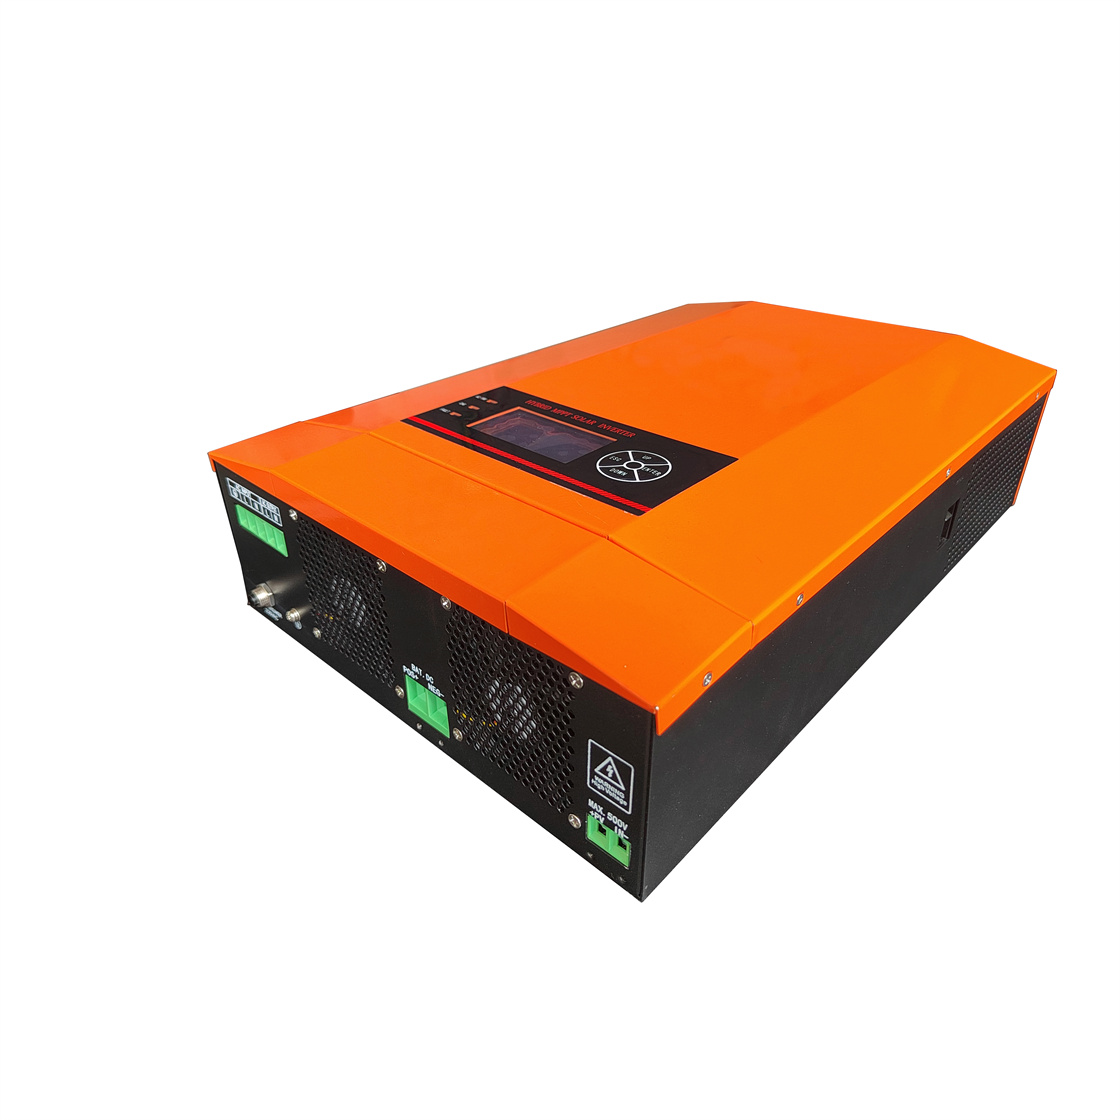 MPPT 3500w solar energy hybrid high frequency pure sine wave inverter and charger with WIFI Monitor for wild camping